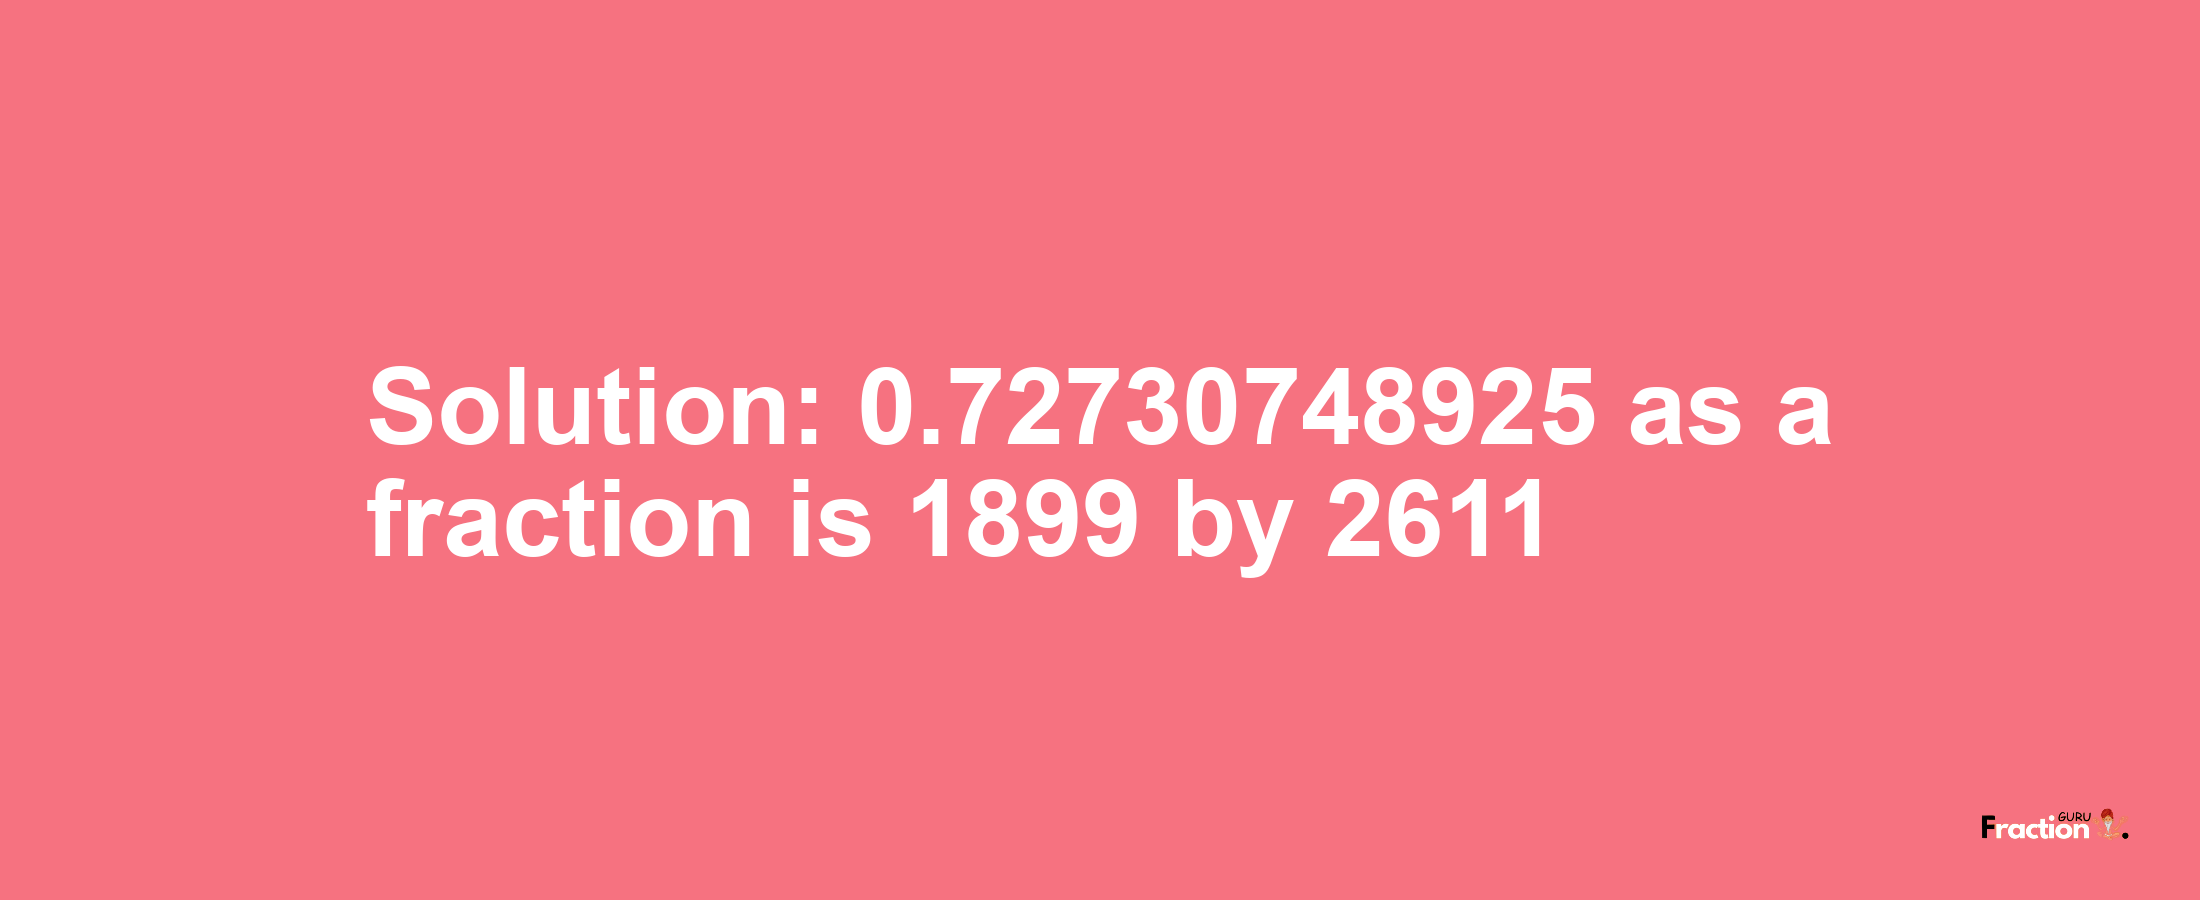 Solution:0.72730748925 as a fraction is 1899/2611